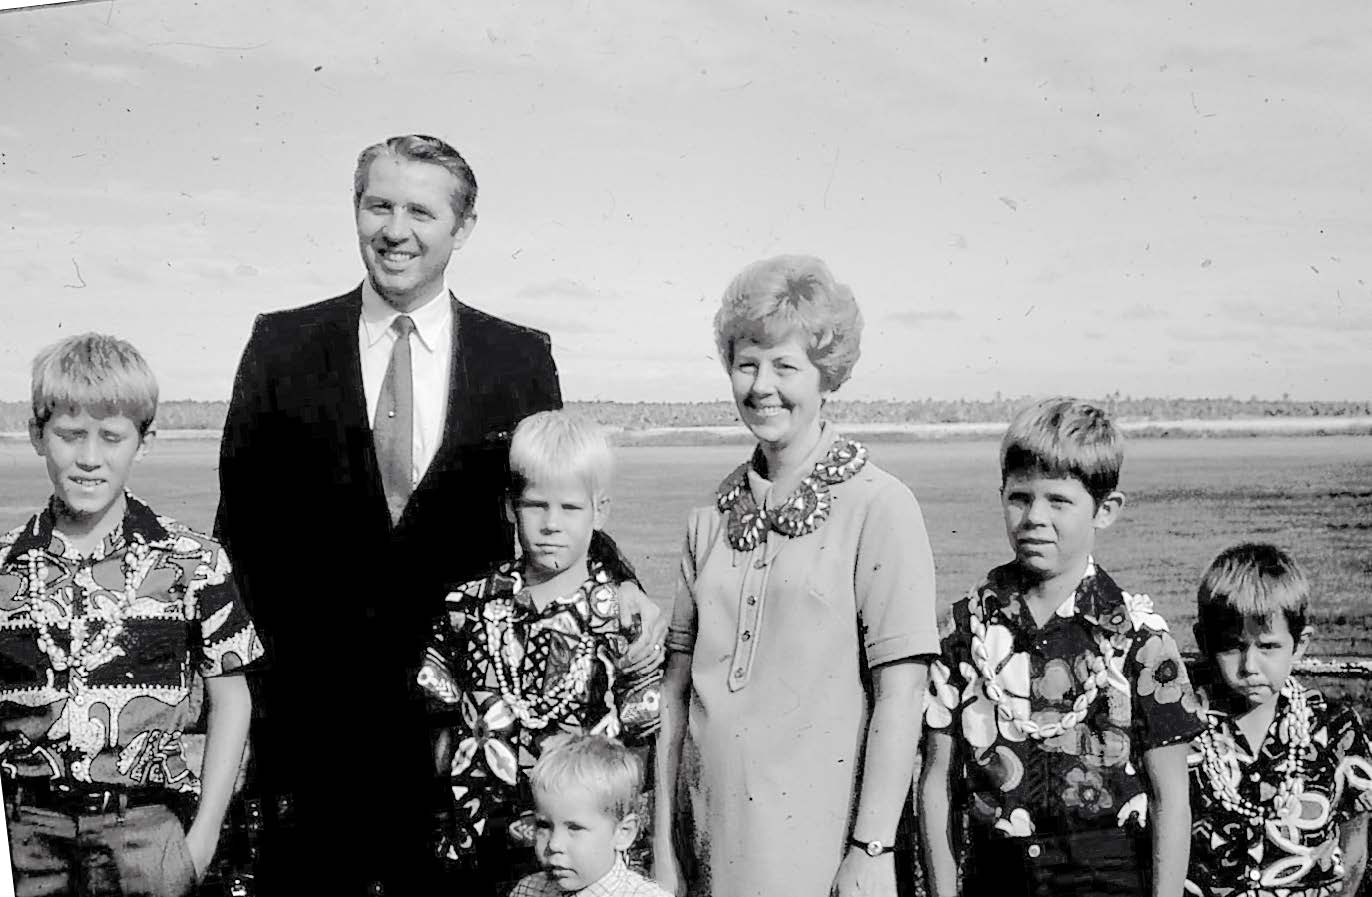 President James and Sister Metta Christensen and their family. Courtesy of Bill Windsor.